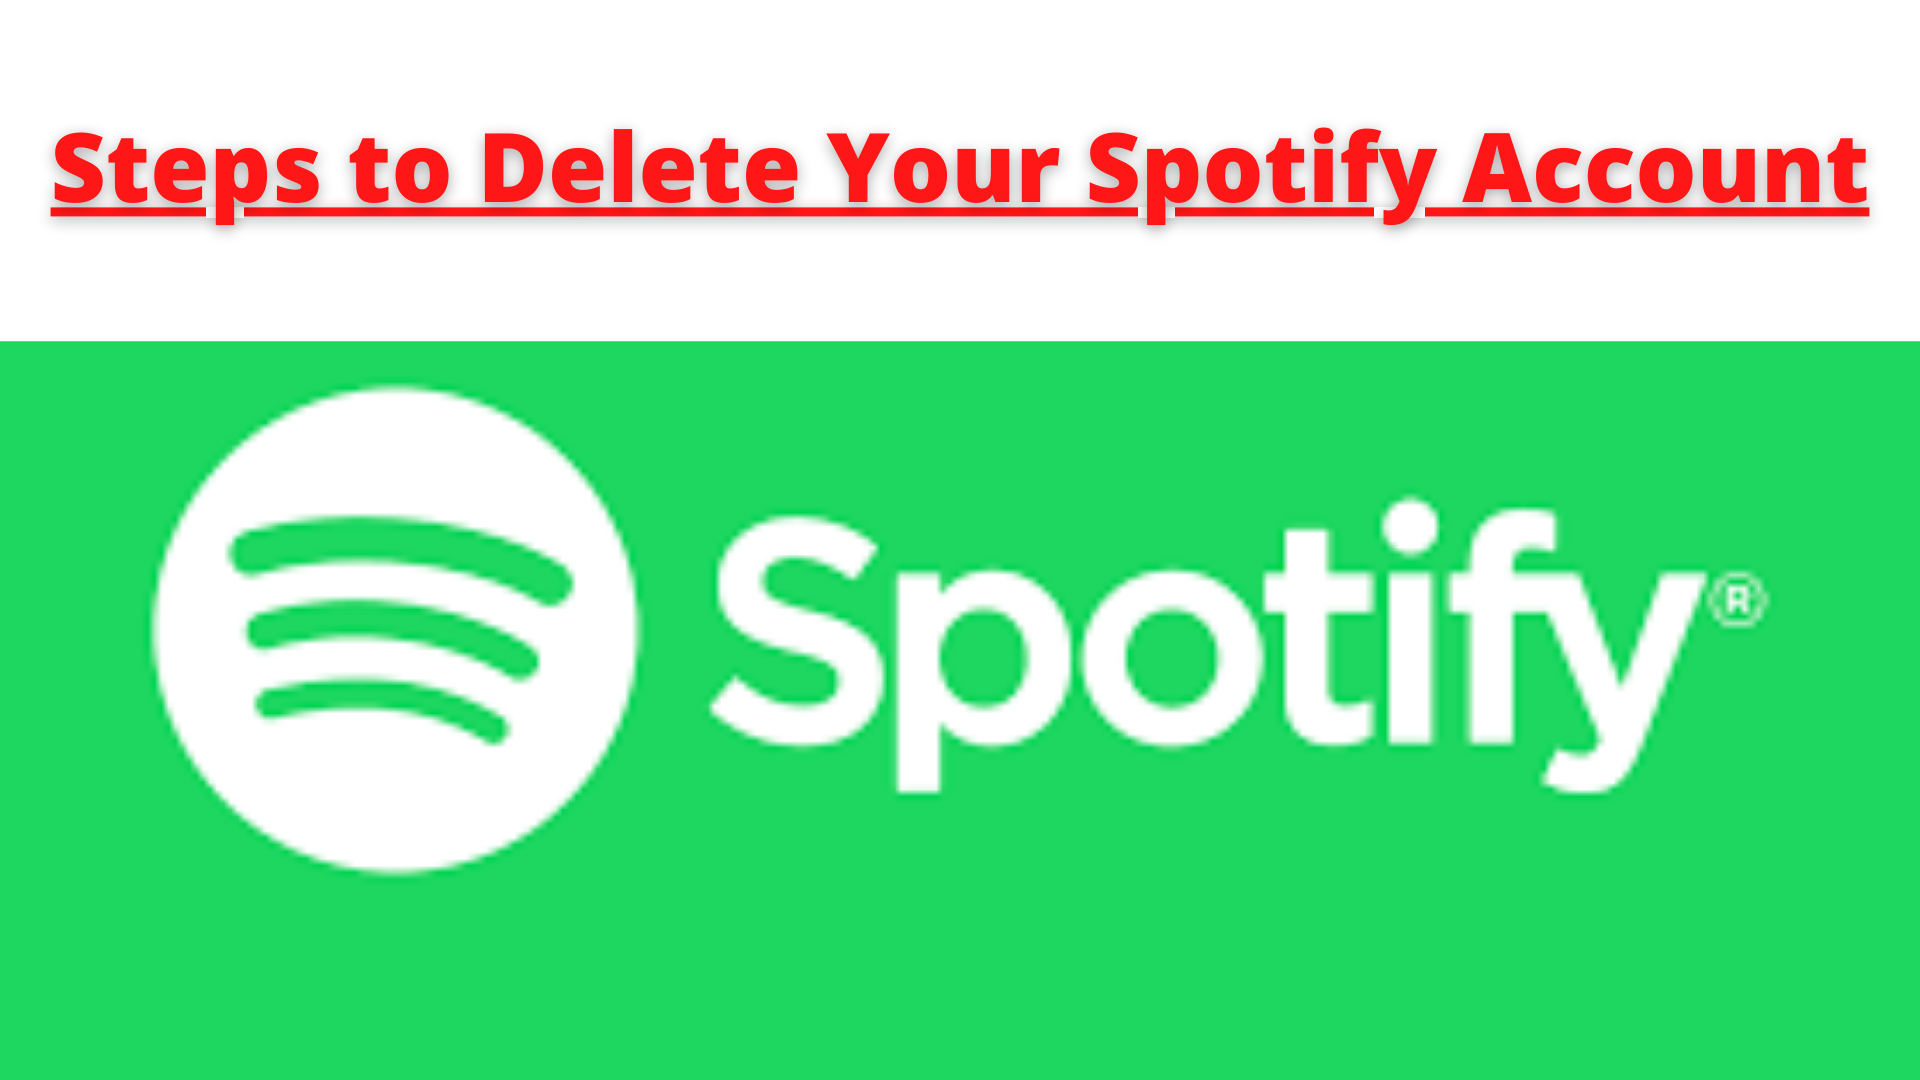 How To Delete Your Spotify Account Permanently?